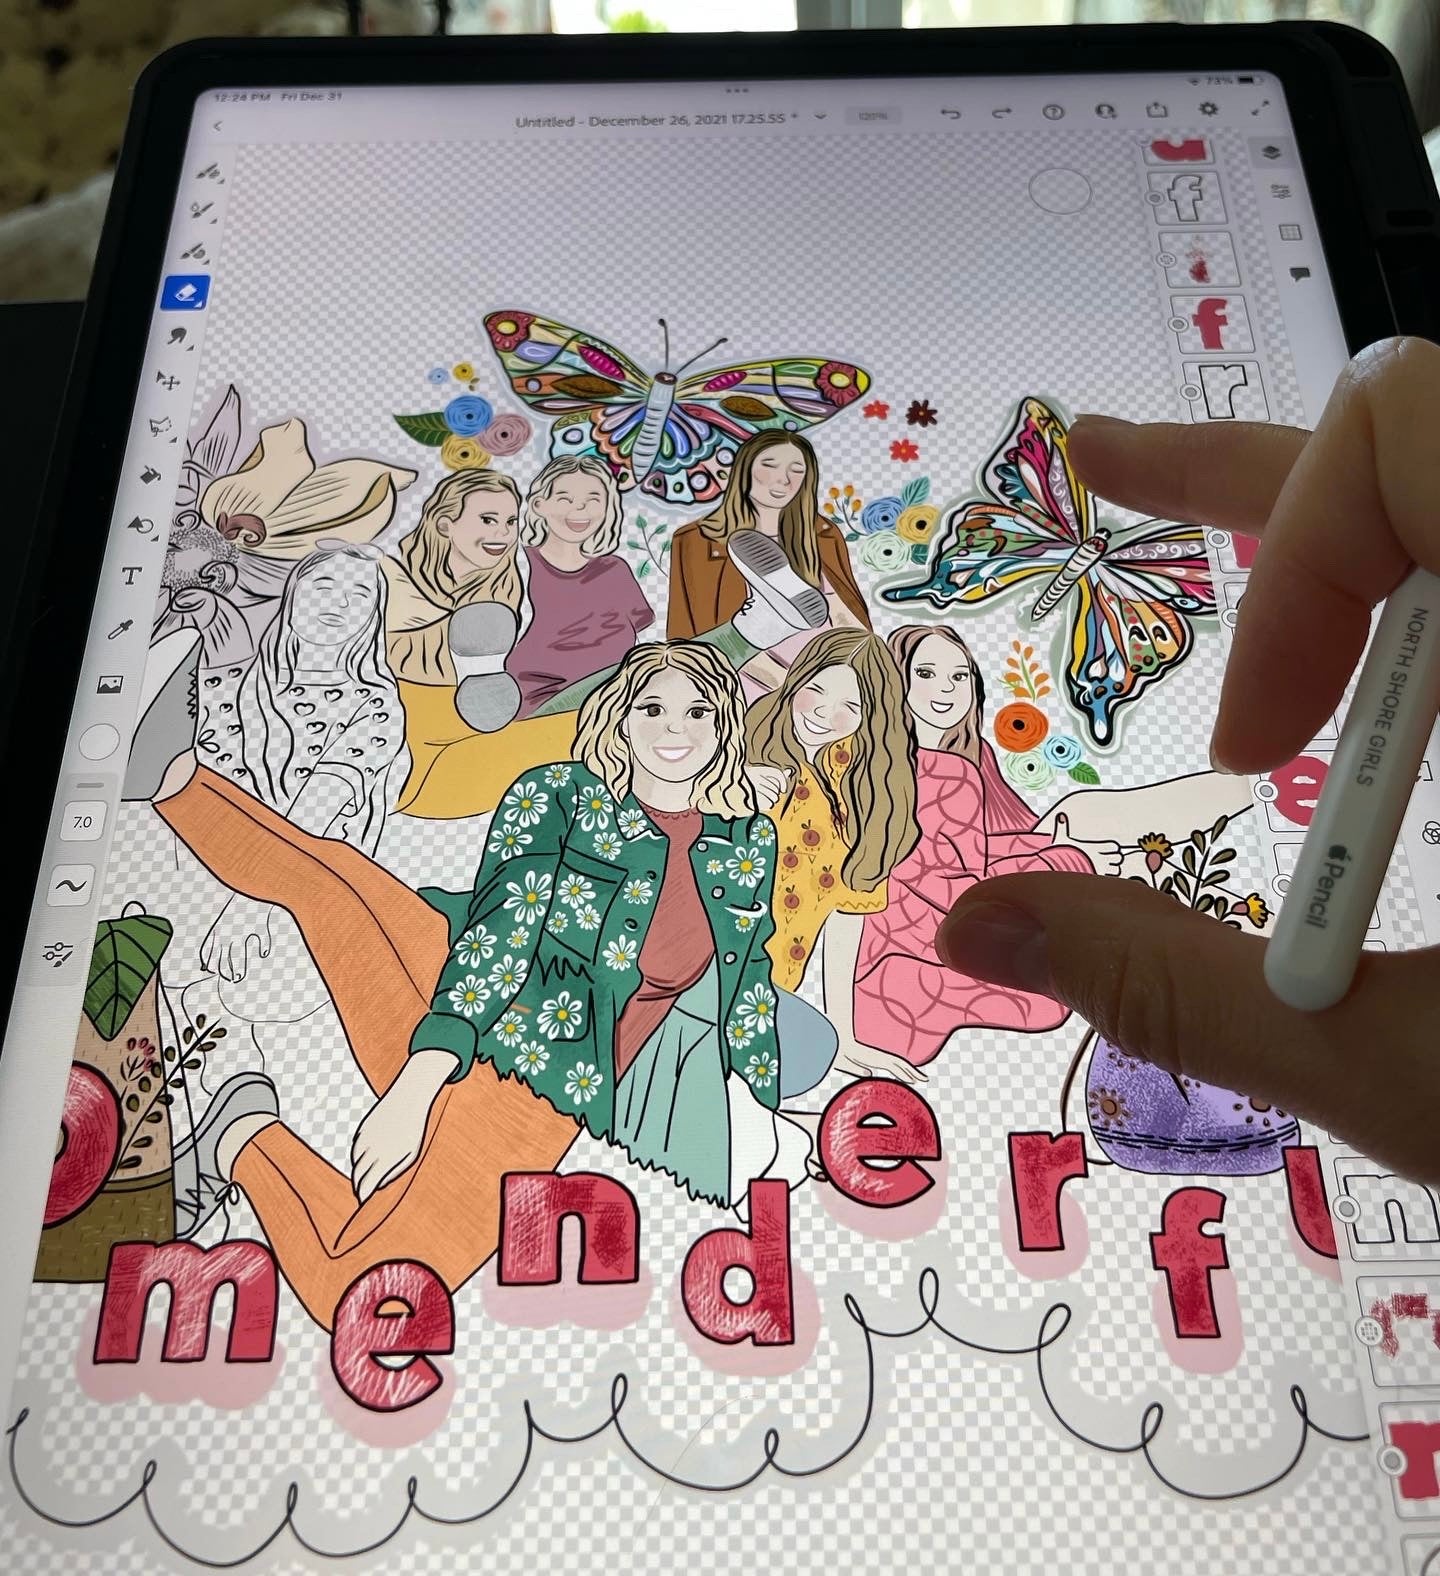 Womenderful drawing process. Women butterflies and flowers empowering graphic design by Nadia Watts